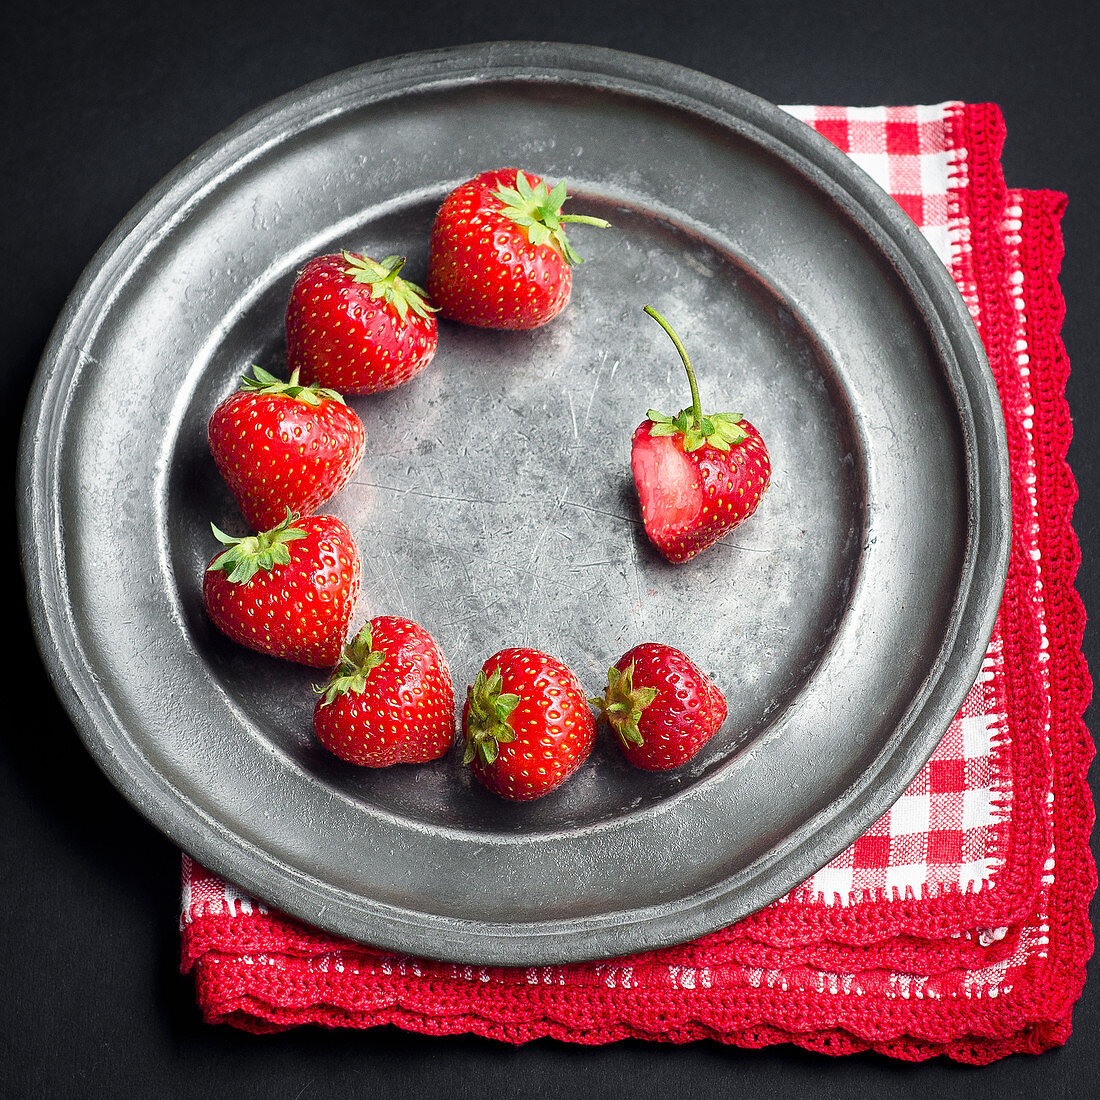 Fresh strawberries arranged circularly on a dark pewter metallic plate with a red and white napkin on a black background